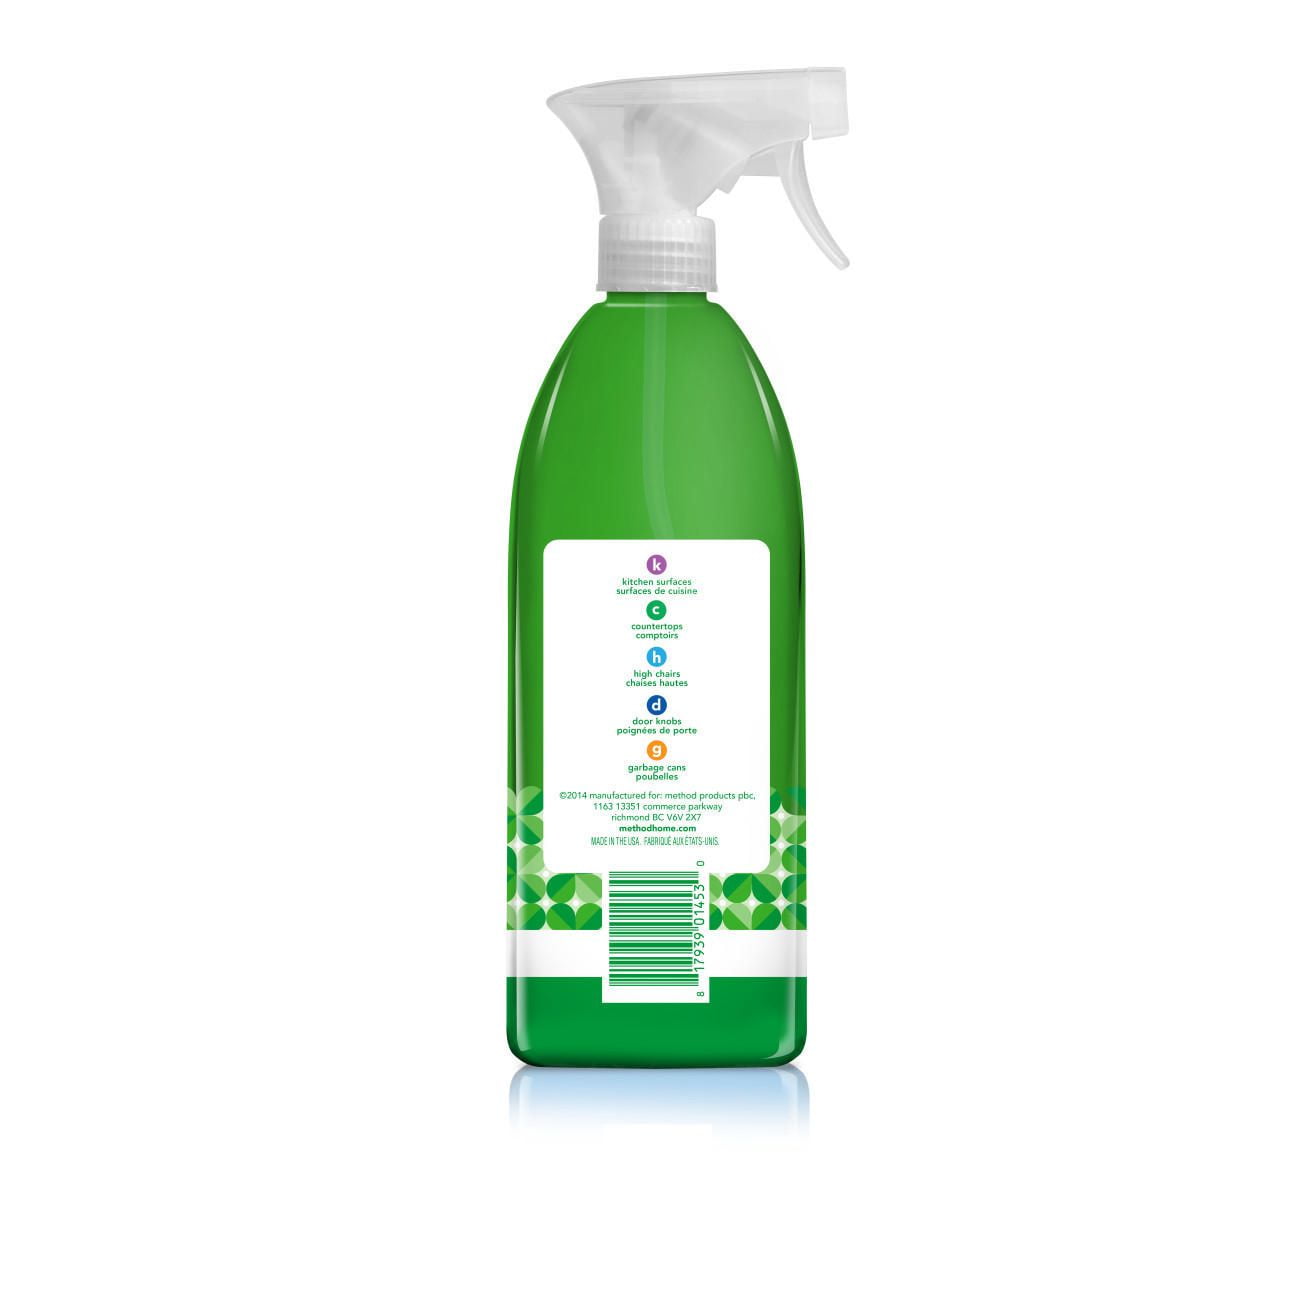 No Nonsense Disinfectant Concentrated Not anti bacterial Multi-surface Hard  non-porous surfaces Any room Disinfectant & cleaner, 5L Bottle